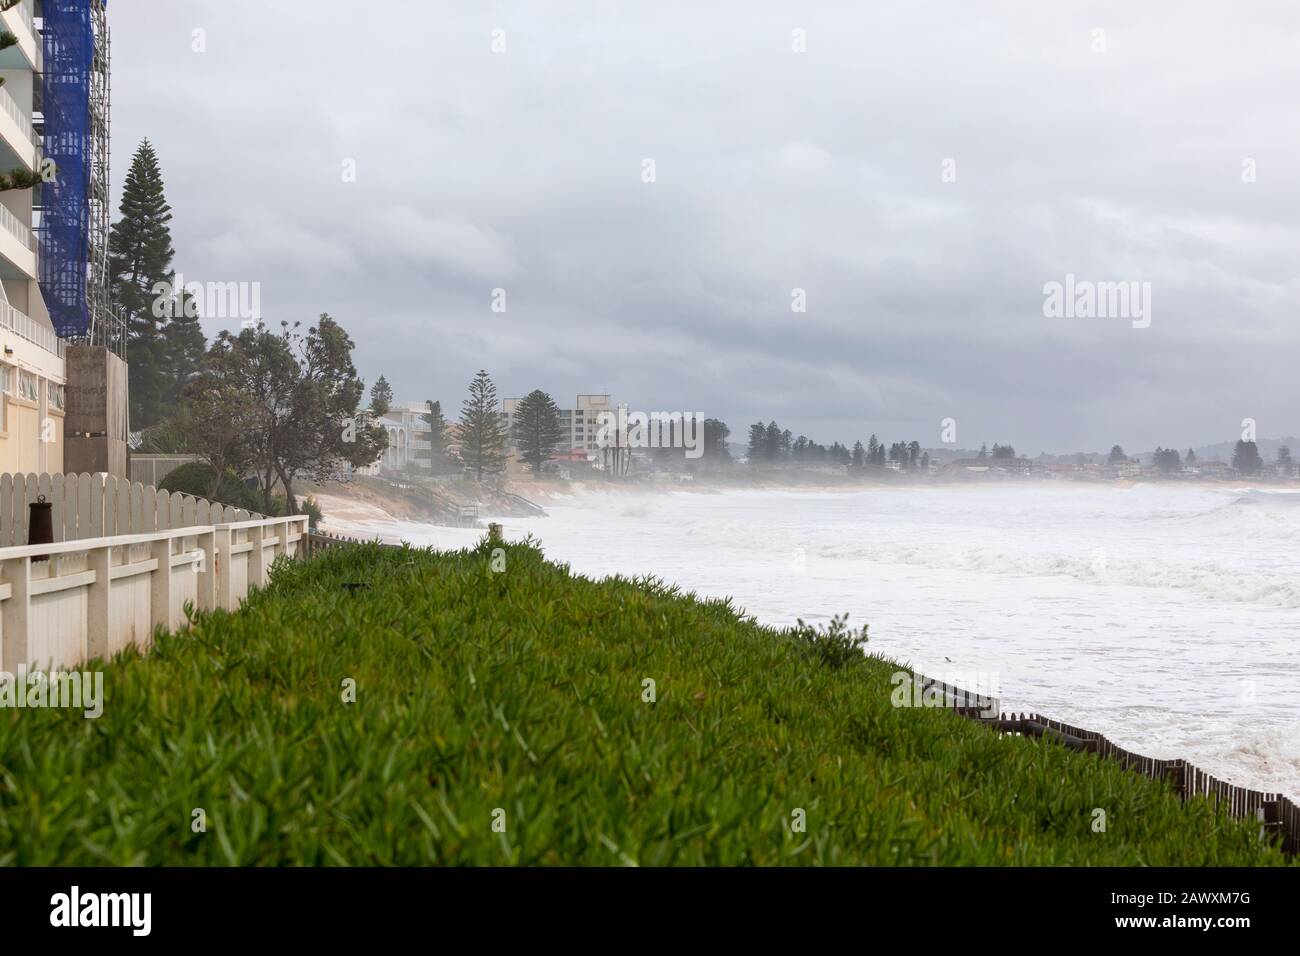 Collaroy beach on sydney northern beaches, king tide during the severe weather storms in february 2020 cause beach erosion and threaten waterfront Stock Photo